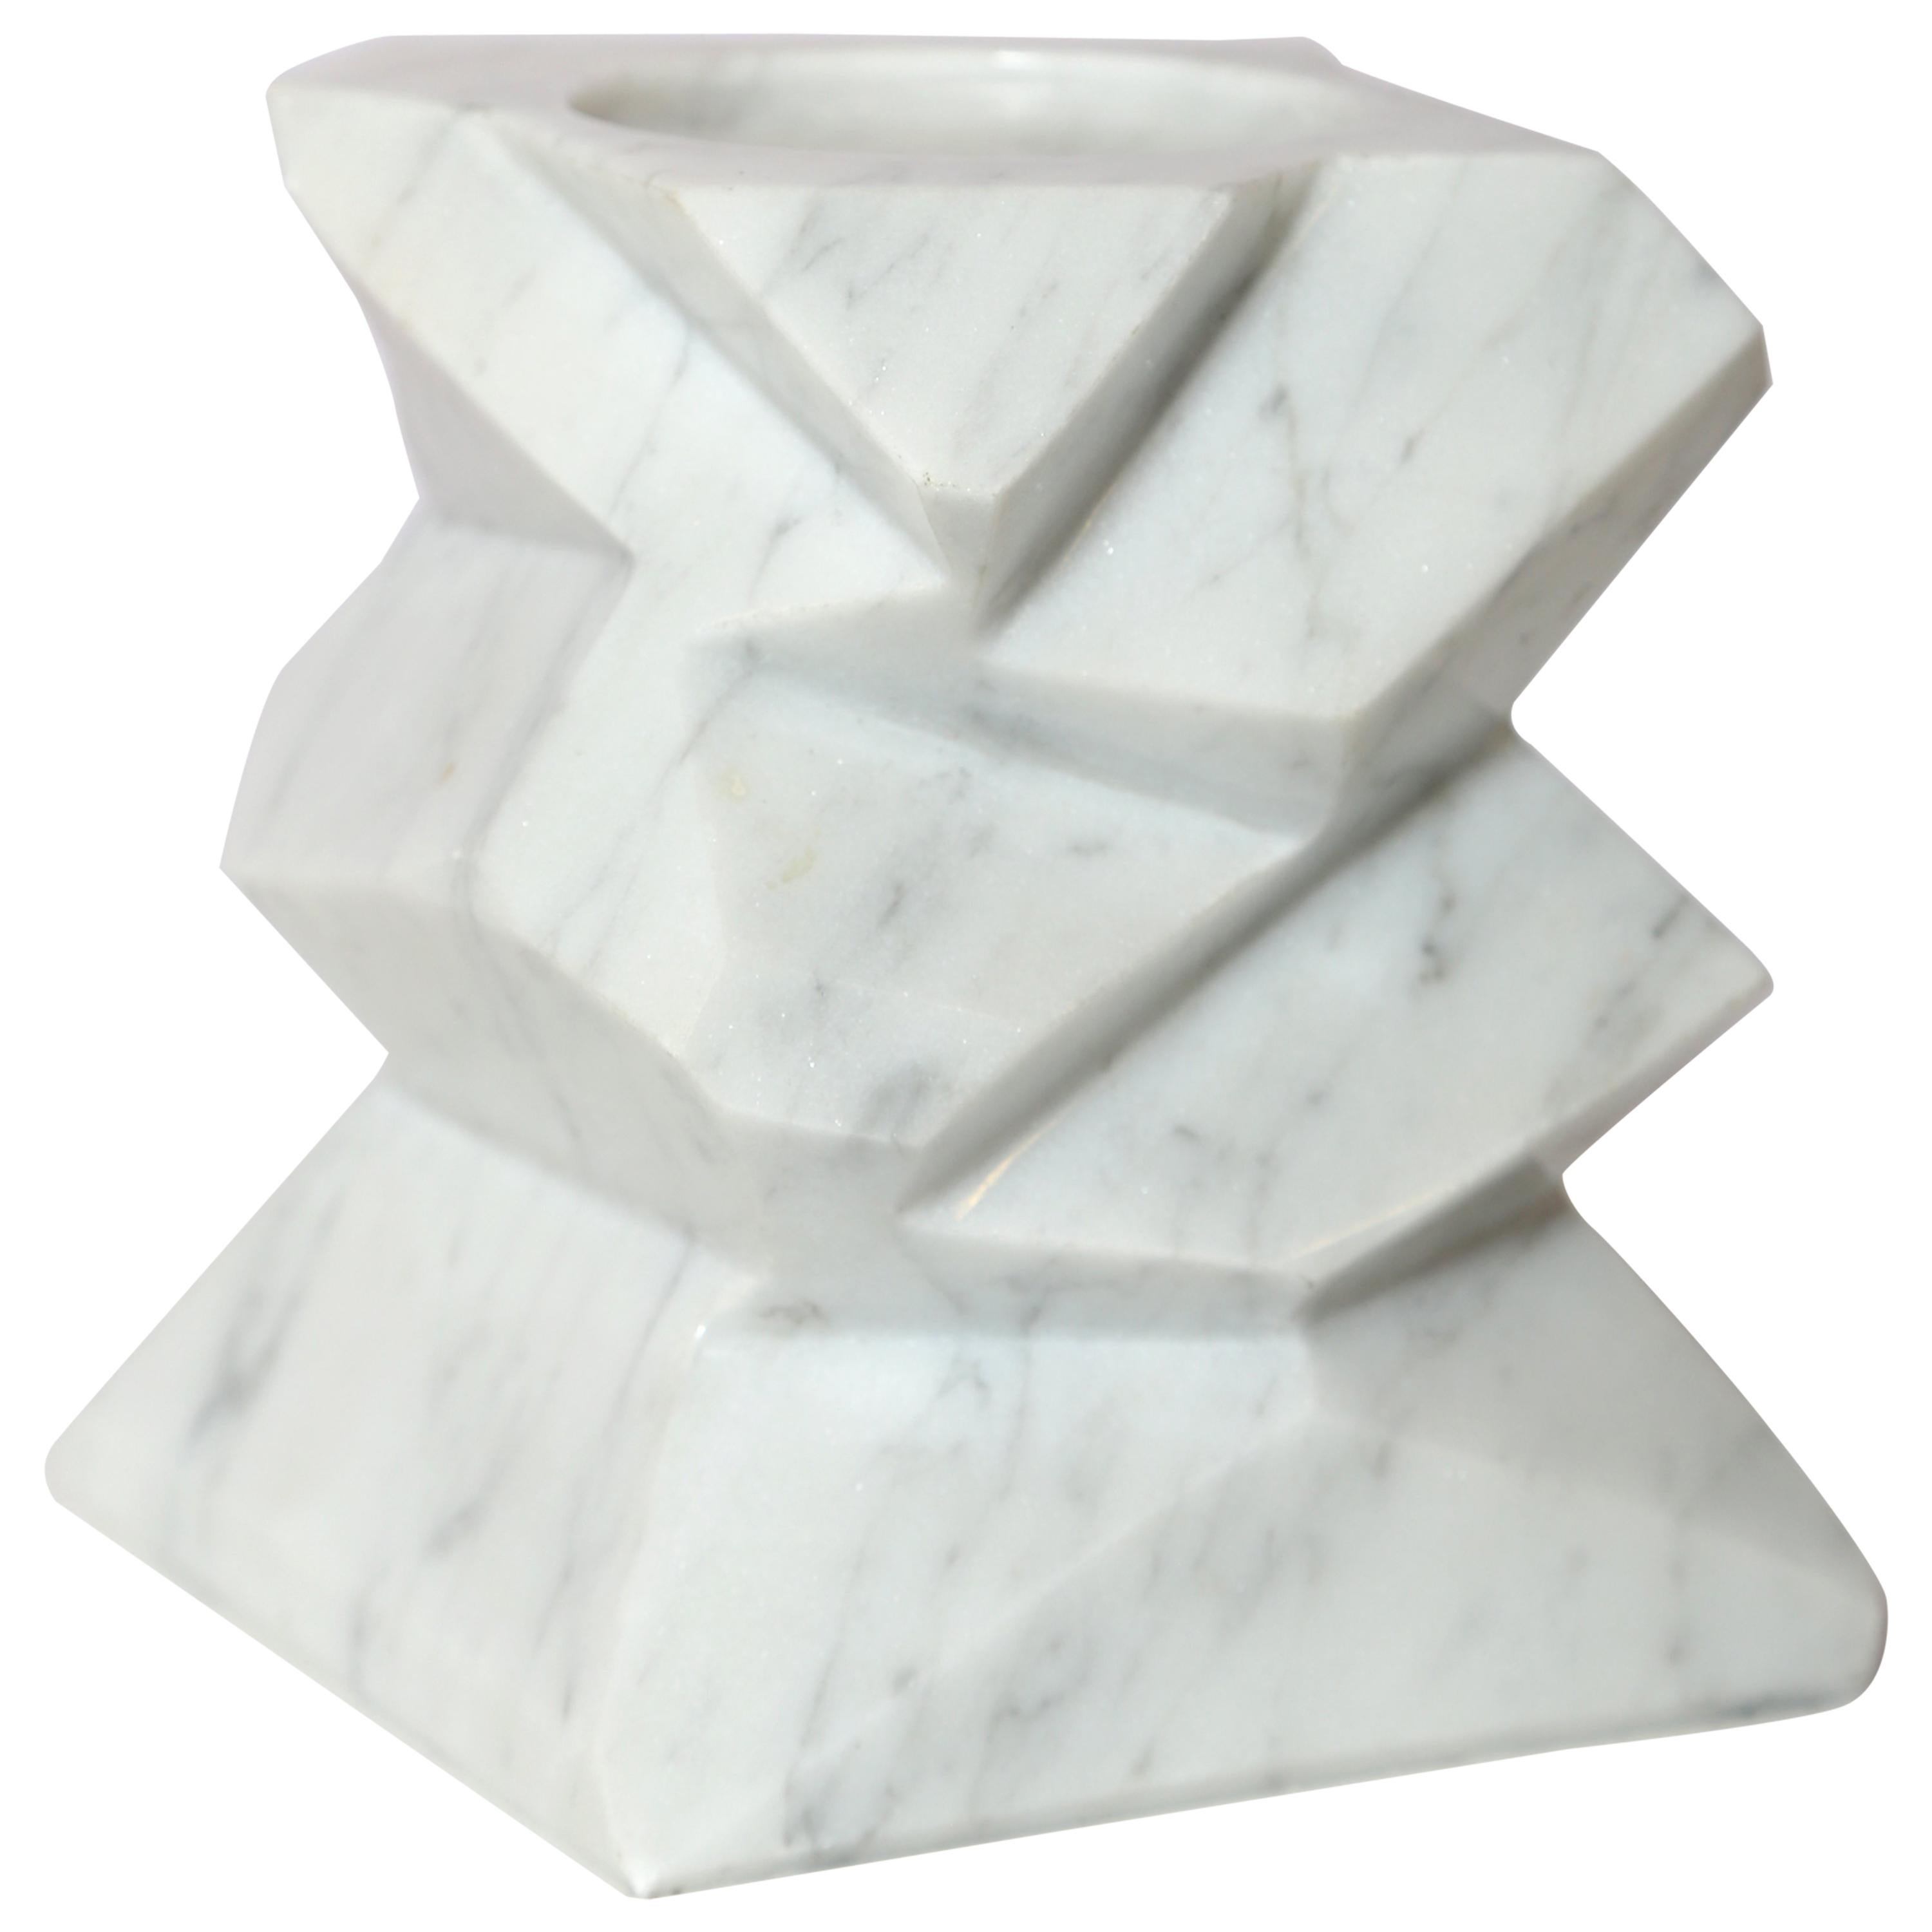 The Marble House Rock Candleholder in White Carrara Marble, Handmade in Italy For Sale